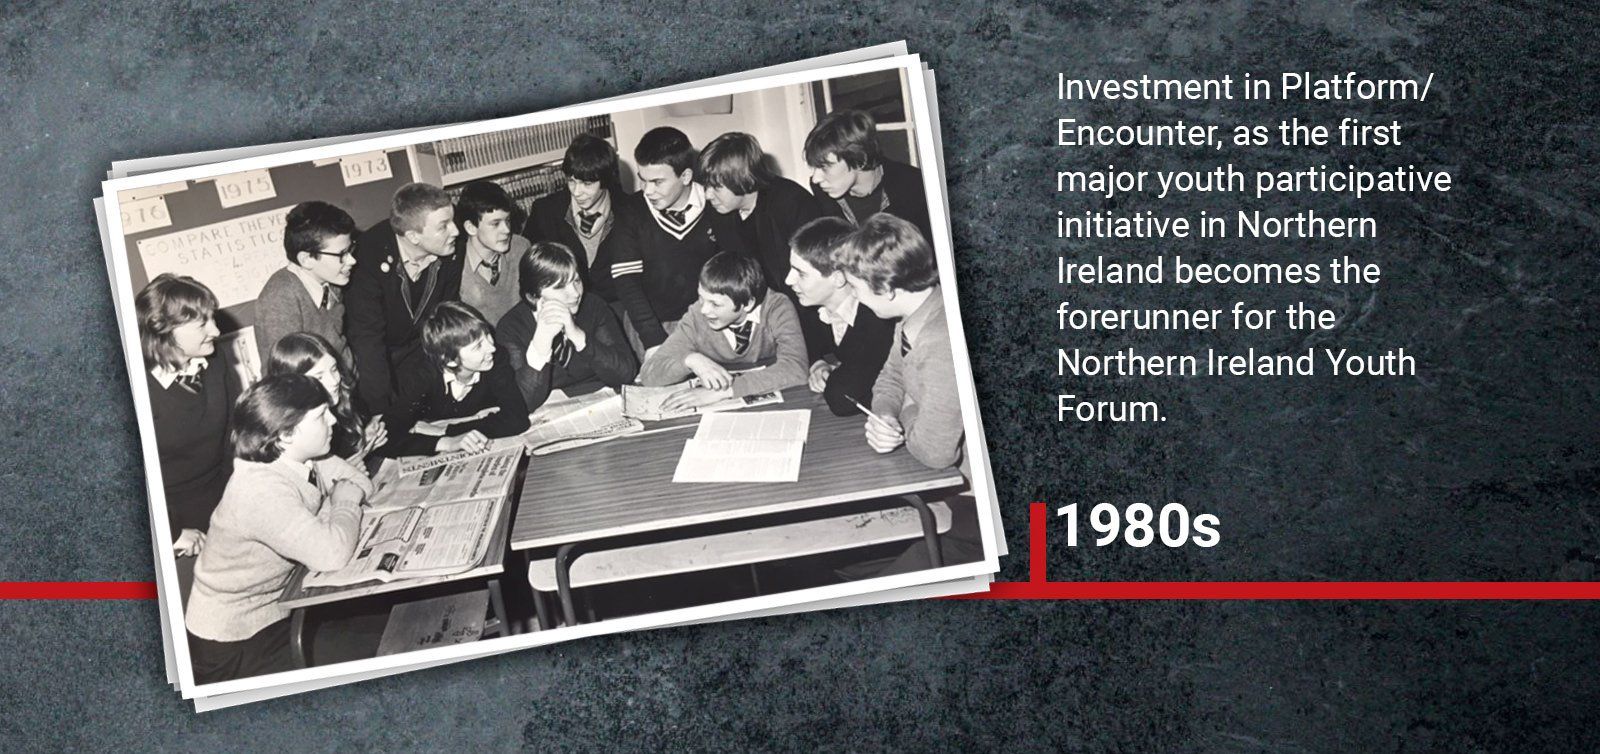 1980s Investment in Platform/ Encounter, as the first major youth participative initiative in Northern Ireland becomes the forerunner for the Northern Ireland Youth Forum.